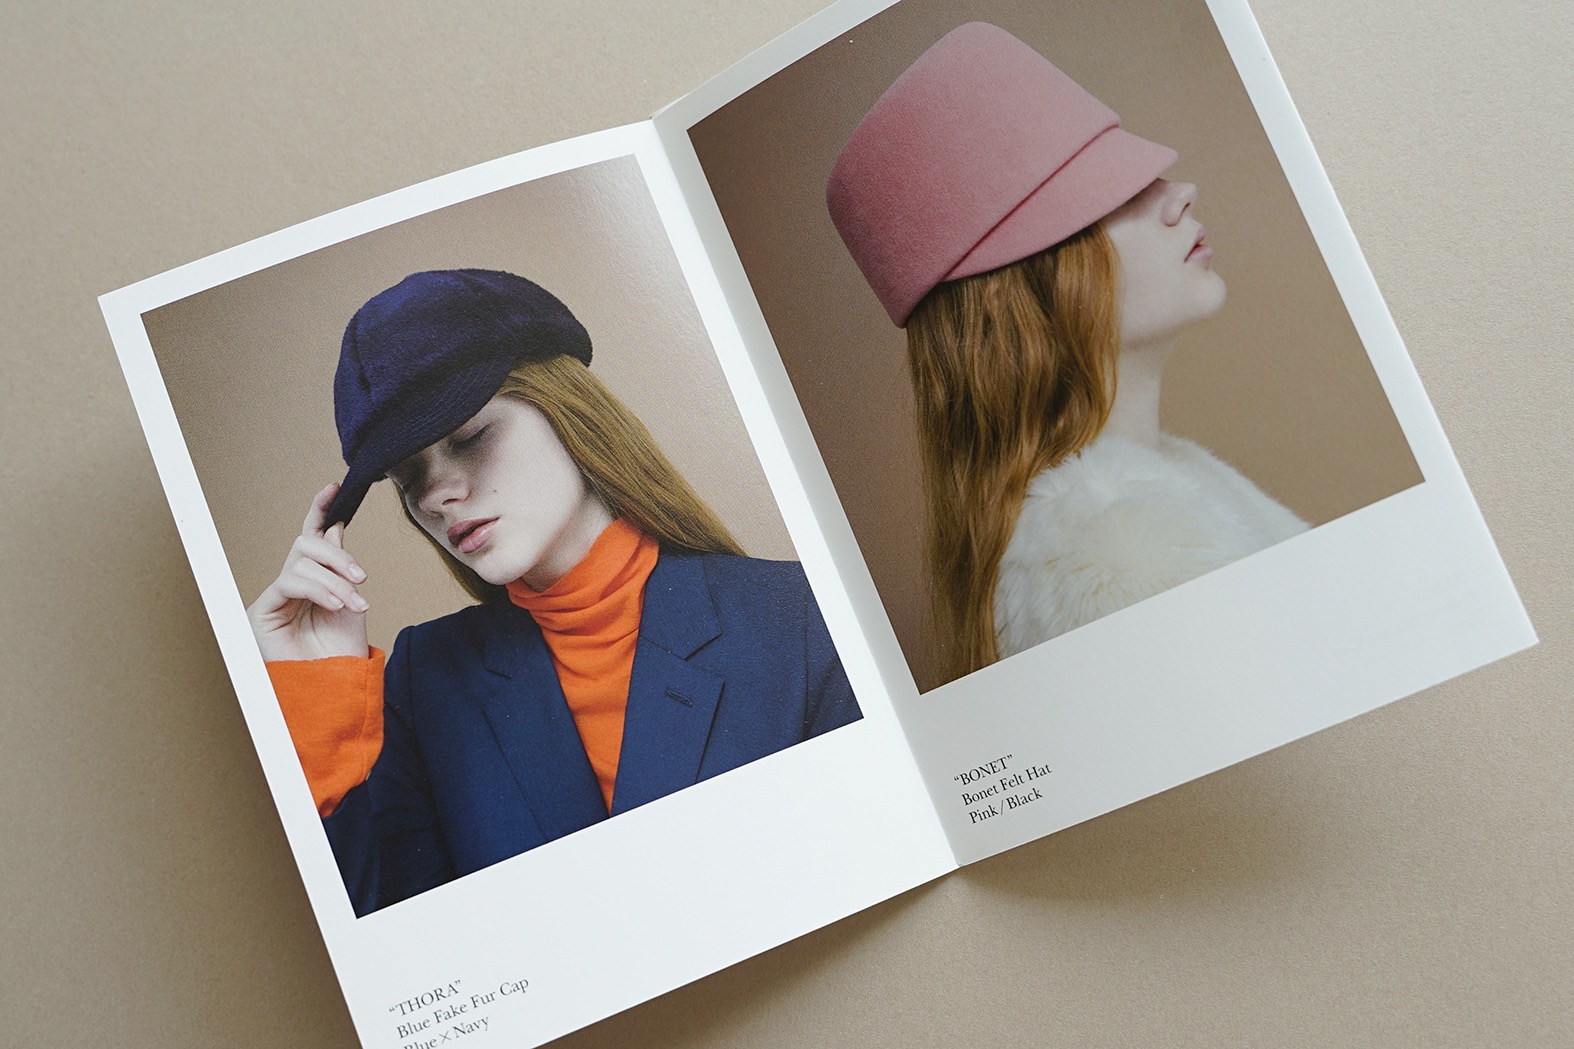 works_mind-the-hat-2017aw_03